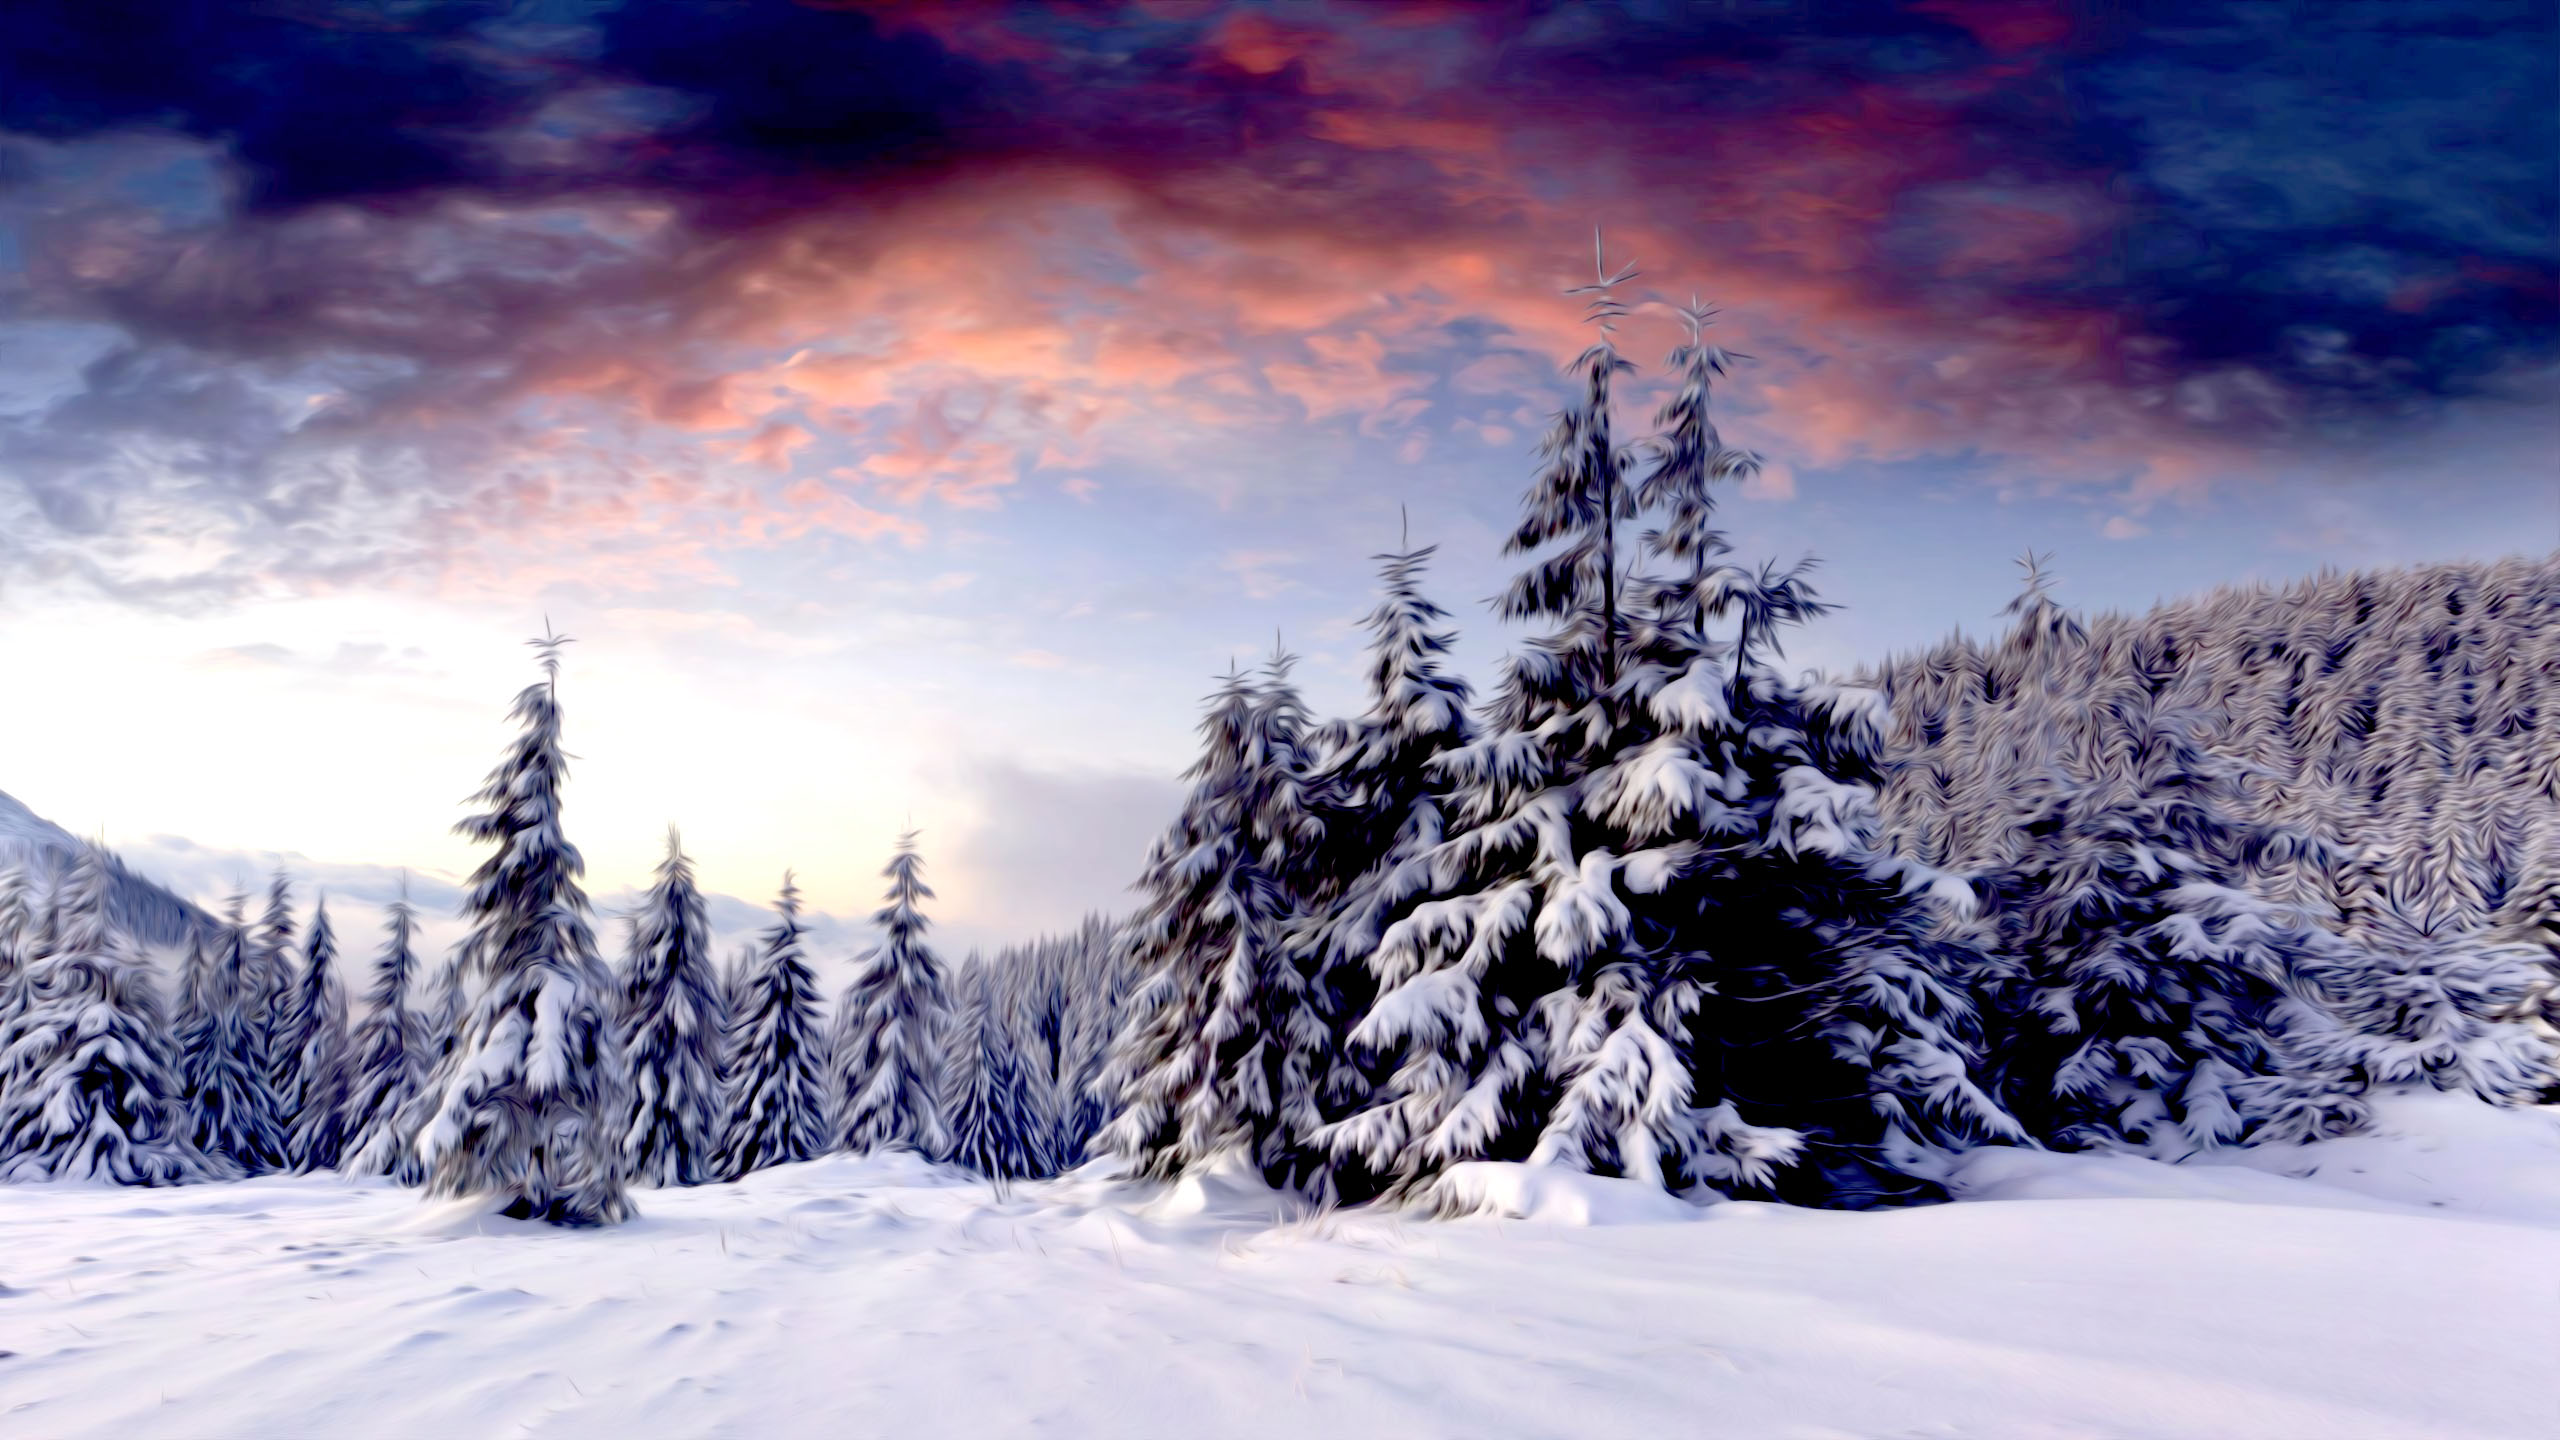 Winter Scenery | Free Desktop Wallpapers for Widescreen, HD and Mobile